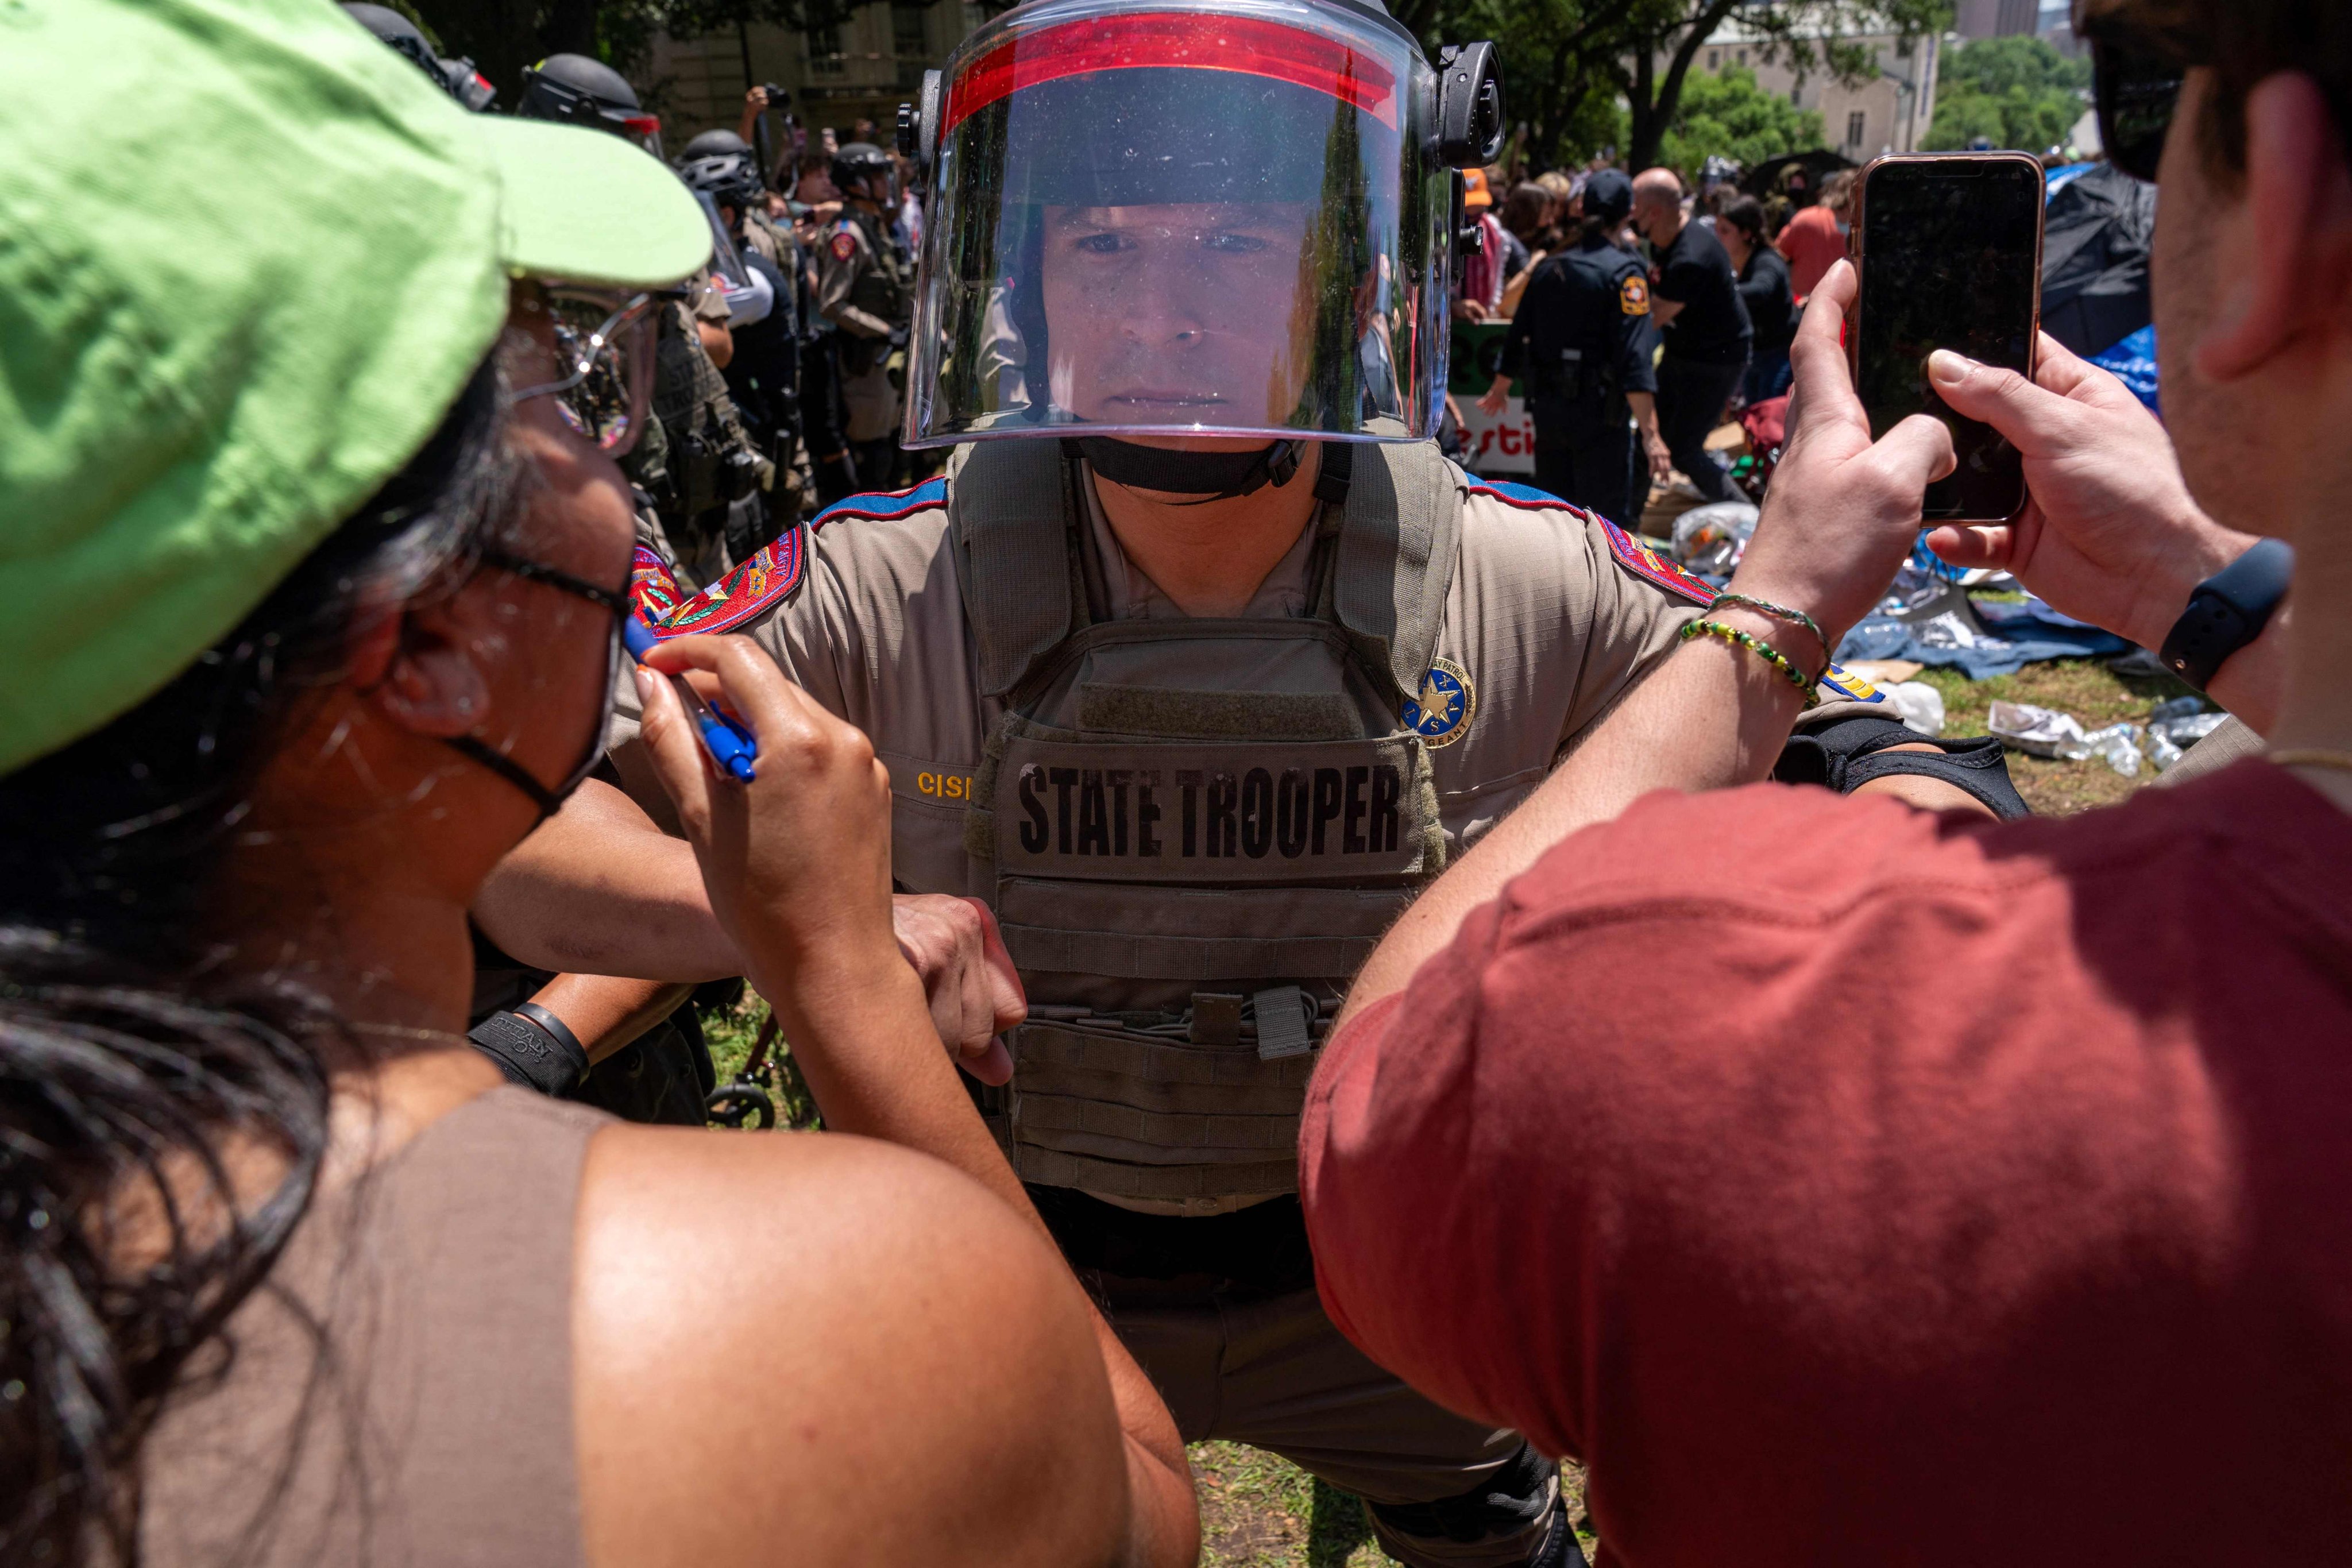 Pro-Palestinian protesters confront a Texas state trooper at the University of Texas in Austin, Texas, on April 29. These protests have posed a major challenge to university administrators who are trying to balance campus commitments to free expression with complaints that the rallies have crossed a line. Photo: AFP